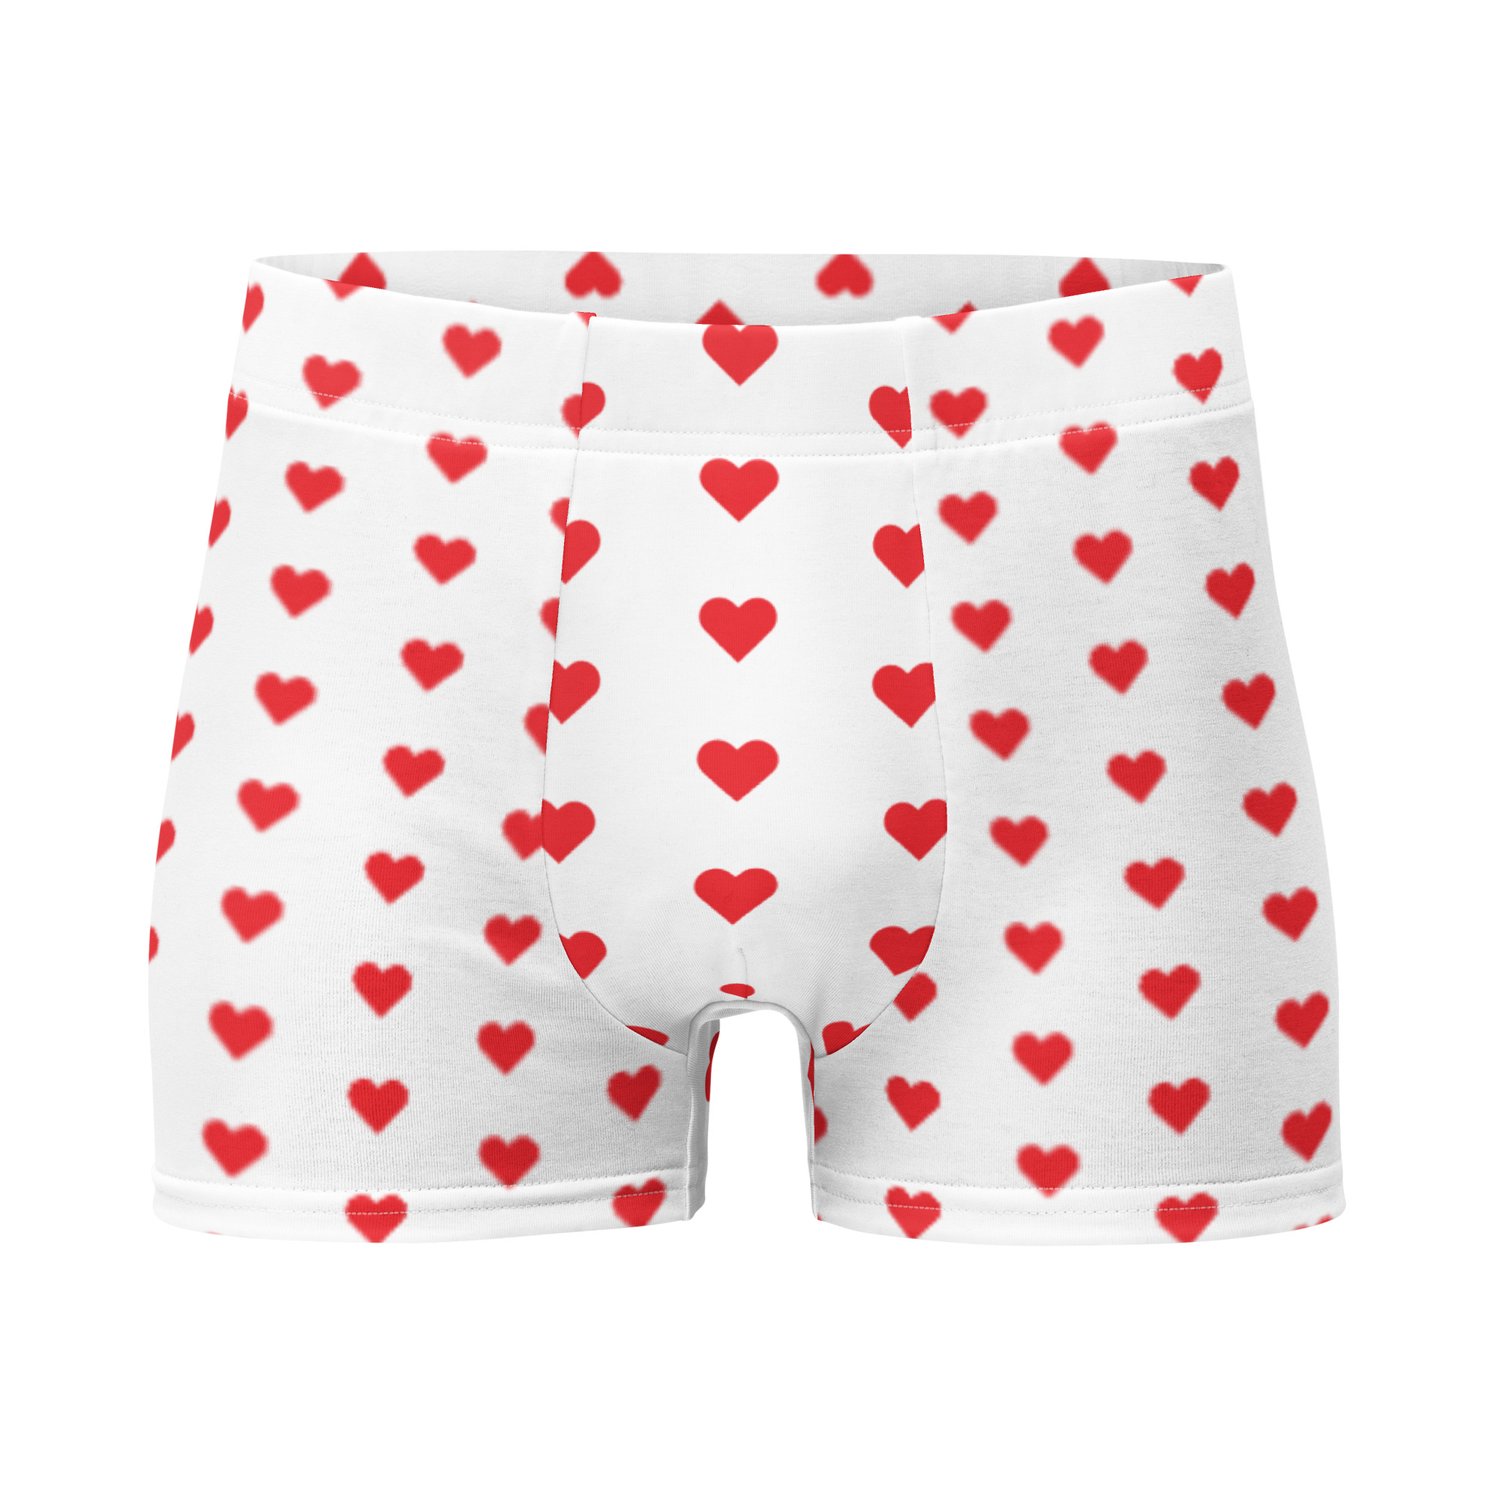 All-Over Print Boxer Briefs